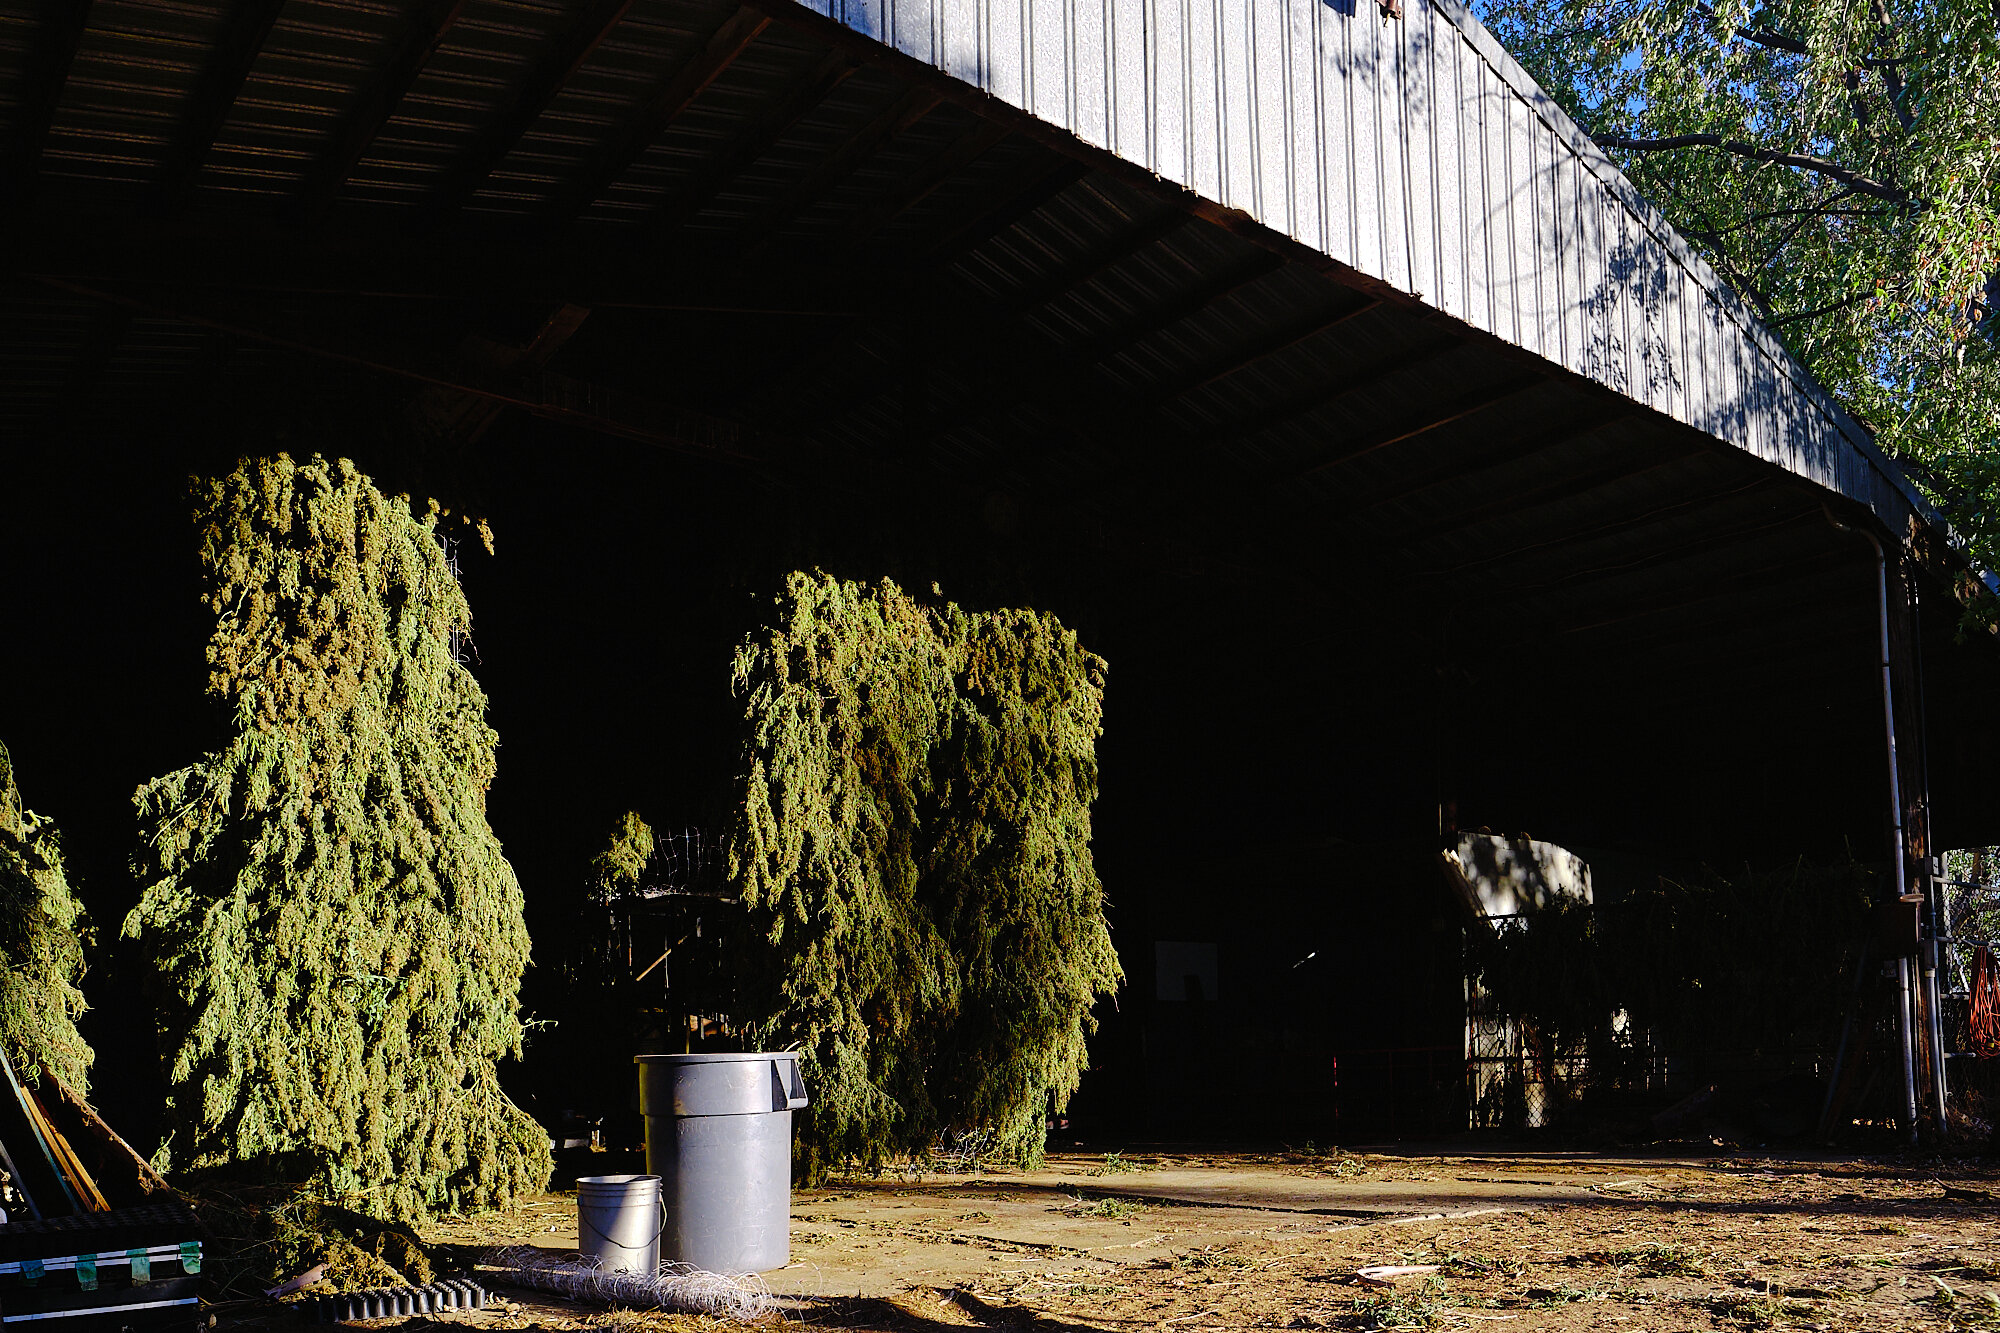  One of the Moonshadow barns filled with 800+ CBG hemp plants. This batch is destined to become CBG biomass: once dry, we shuck the flowers and leaves off, cure it and create topical products from the oil. | 10/27/20 Arjay Ranch, CA 